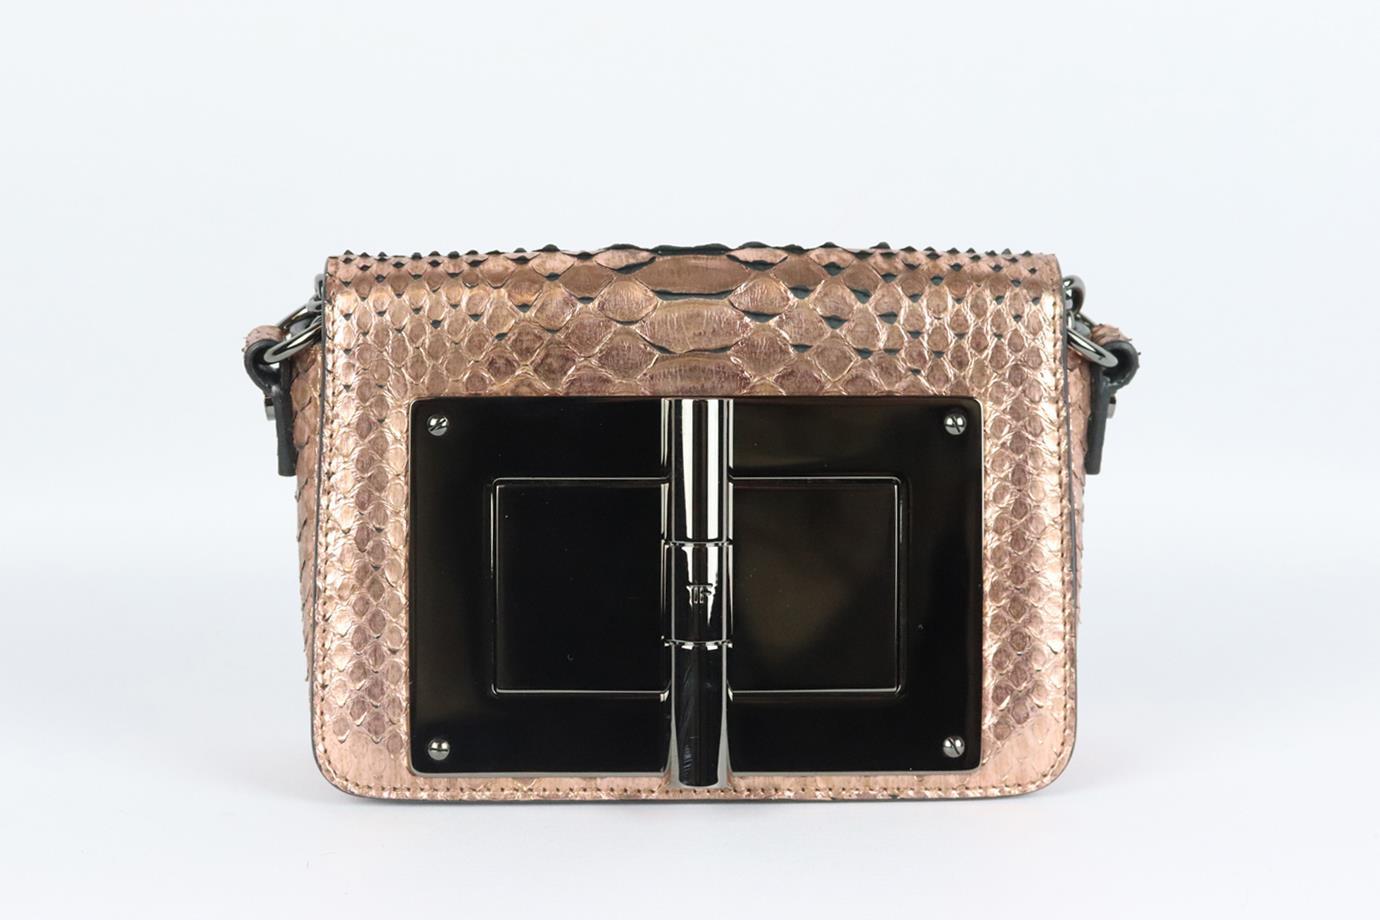 Tom Ford Natalia small metallic python shoulder bag. Made from rose-gold pythons with the brand’s signature gunmetal-tone bar on the front. Rose-gold python. Twist lock fastening at the front. Does not come with dustbag or box. Width: 7 in. Height: